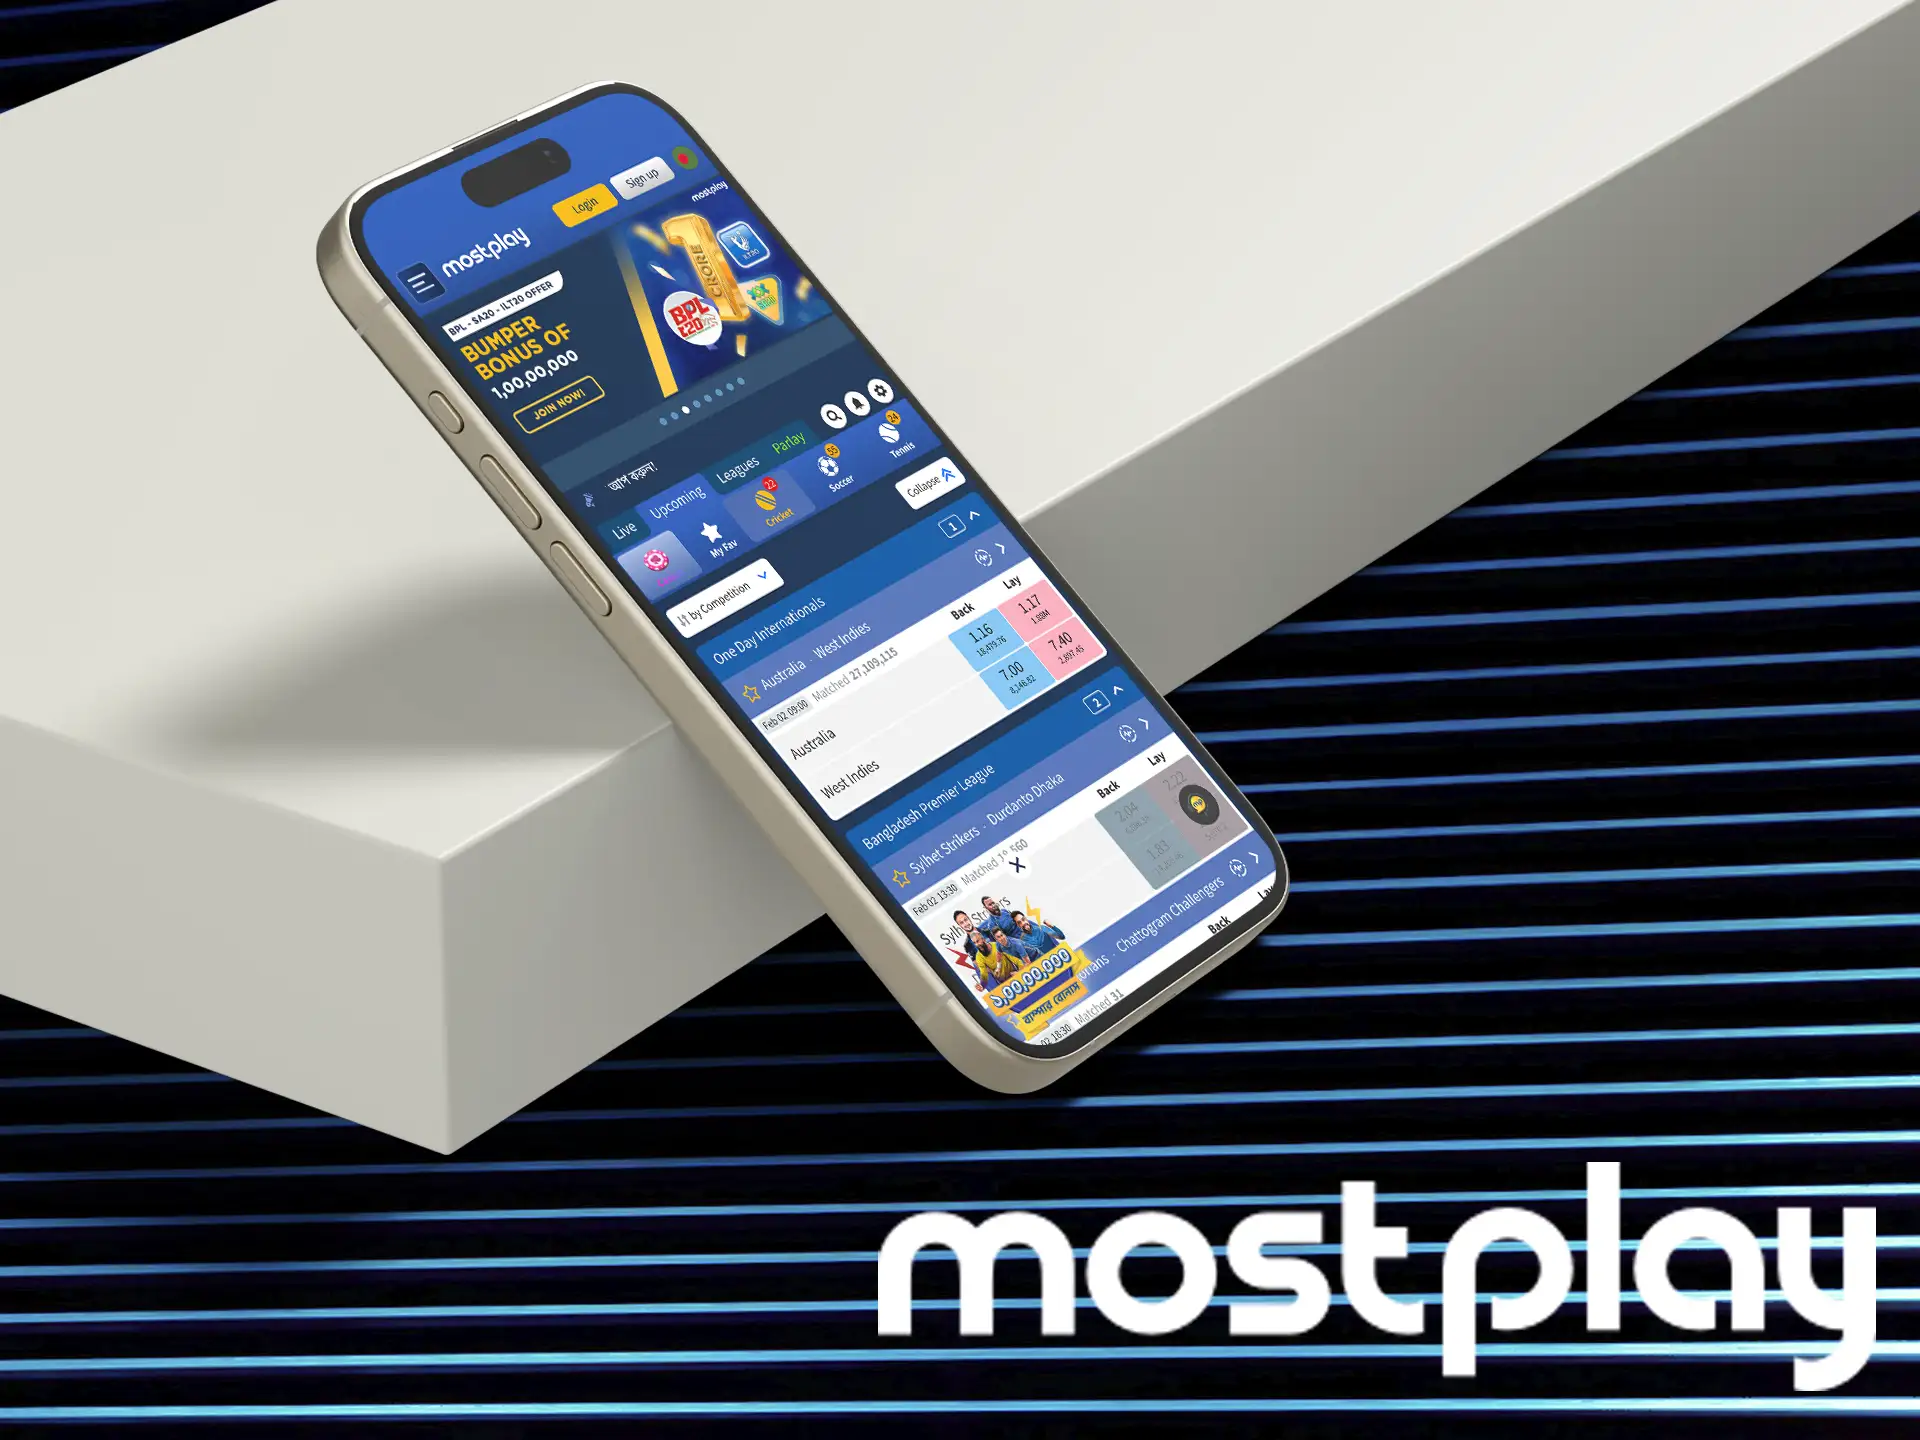 Start earning real money simply by placing sports bets with your device on the Mostplay platform.